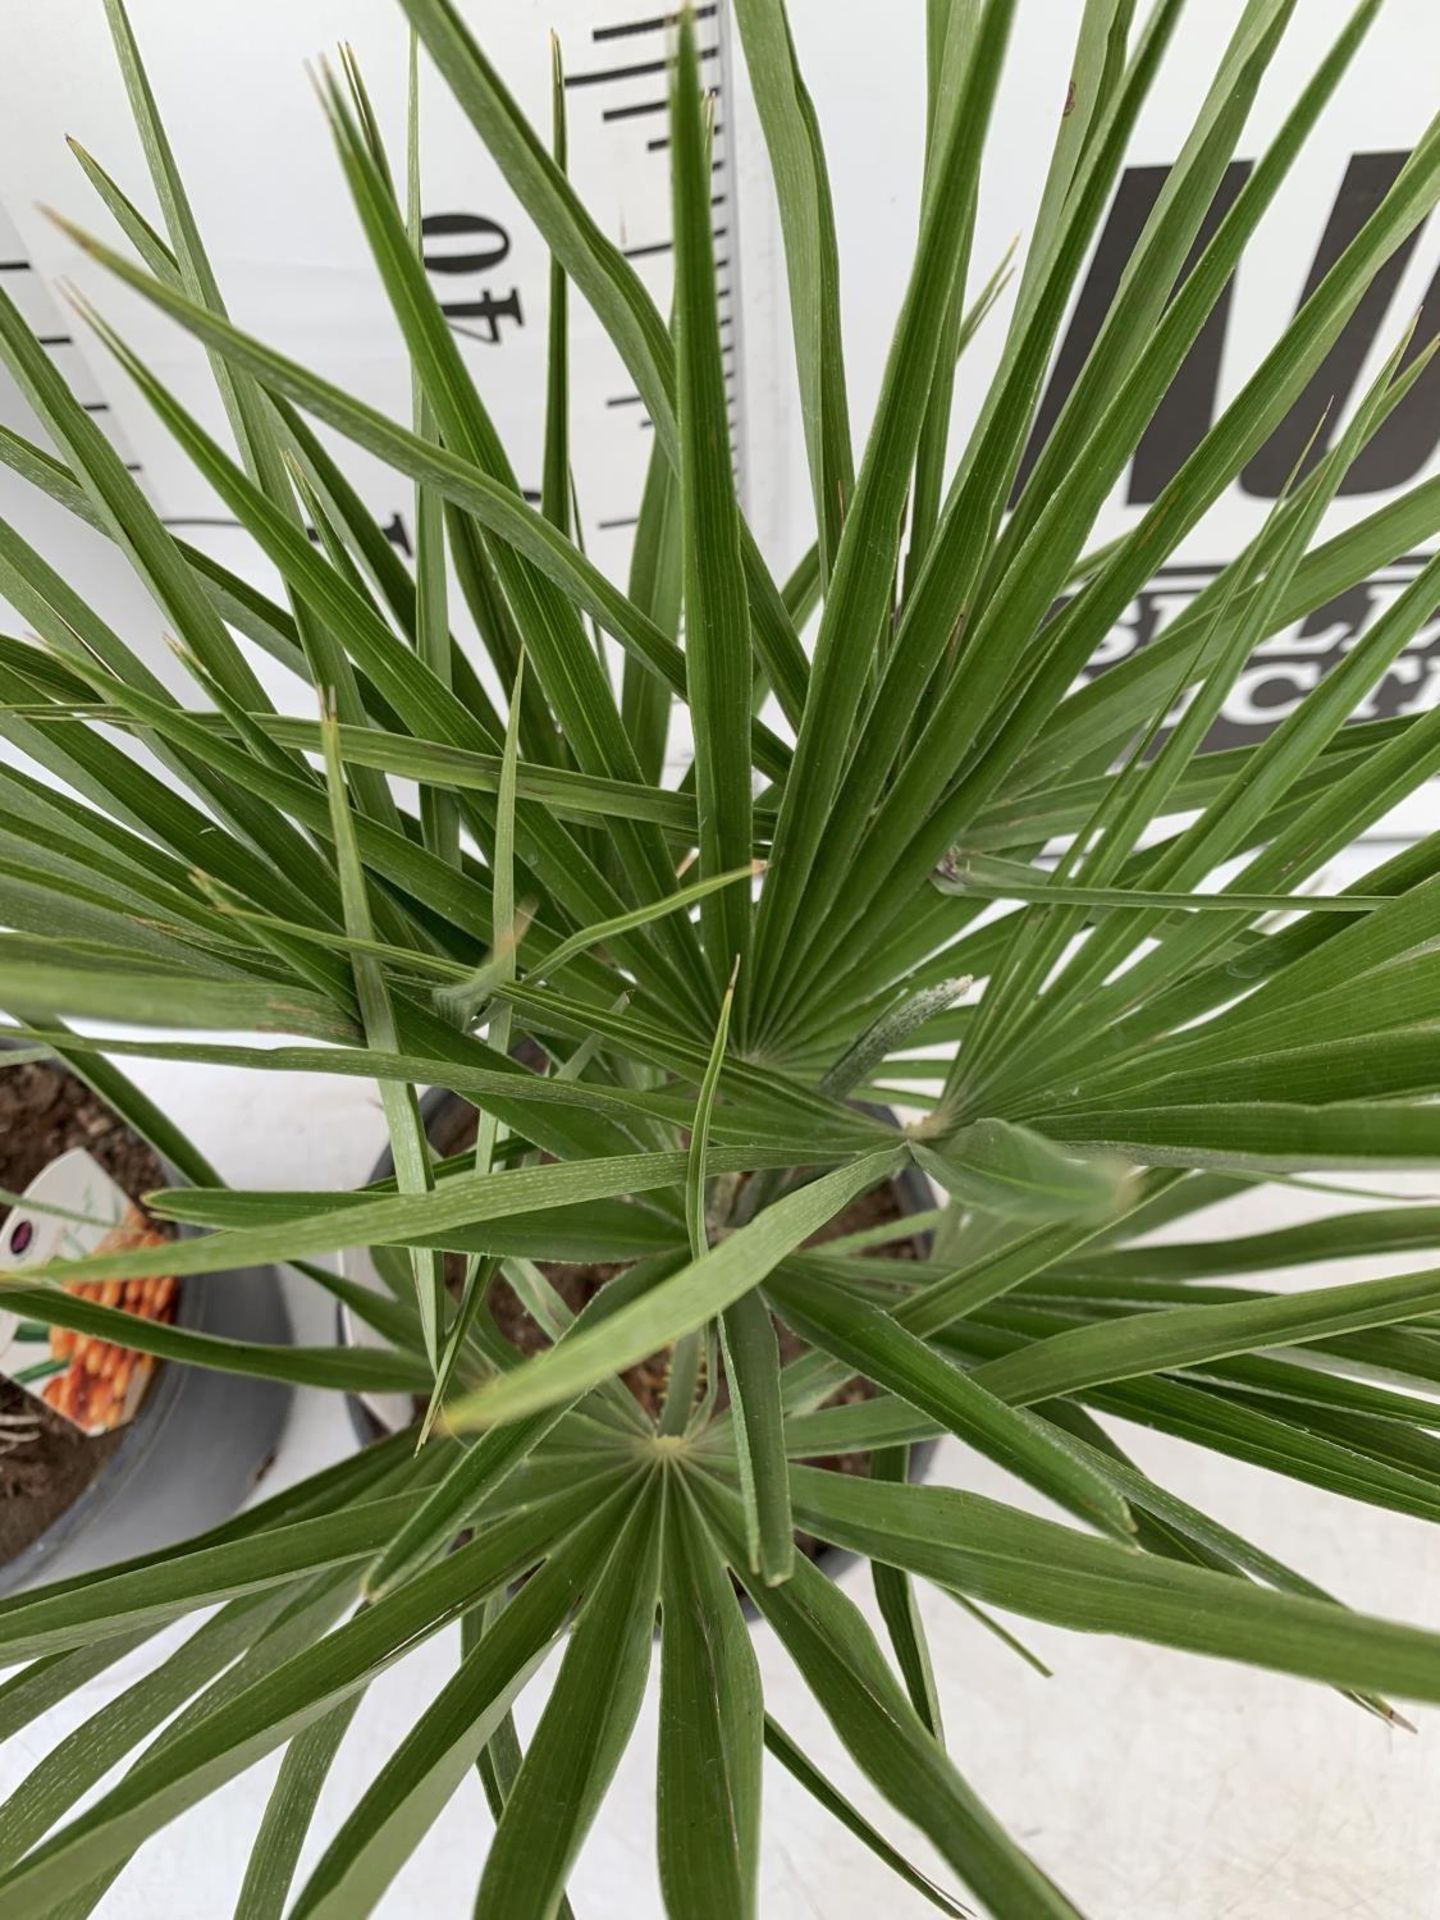 TWO CHAMAEROPS HUMILIS HARDY IN 3 LTR POTS APPROX 60CM IN HEIGHT PLUS VAT TO BE SOLD FOR THE TWO - Image 5 of 6